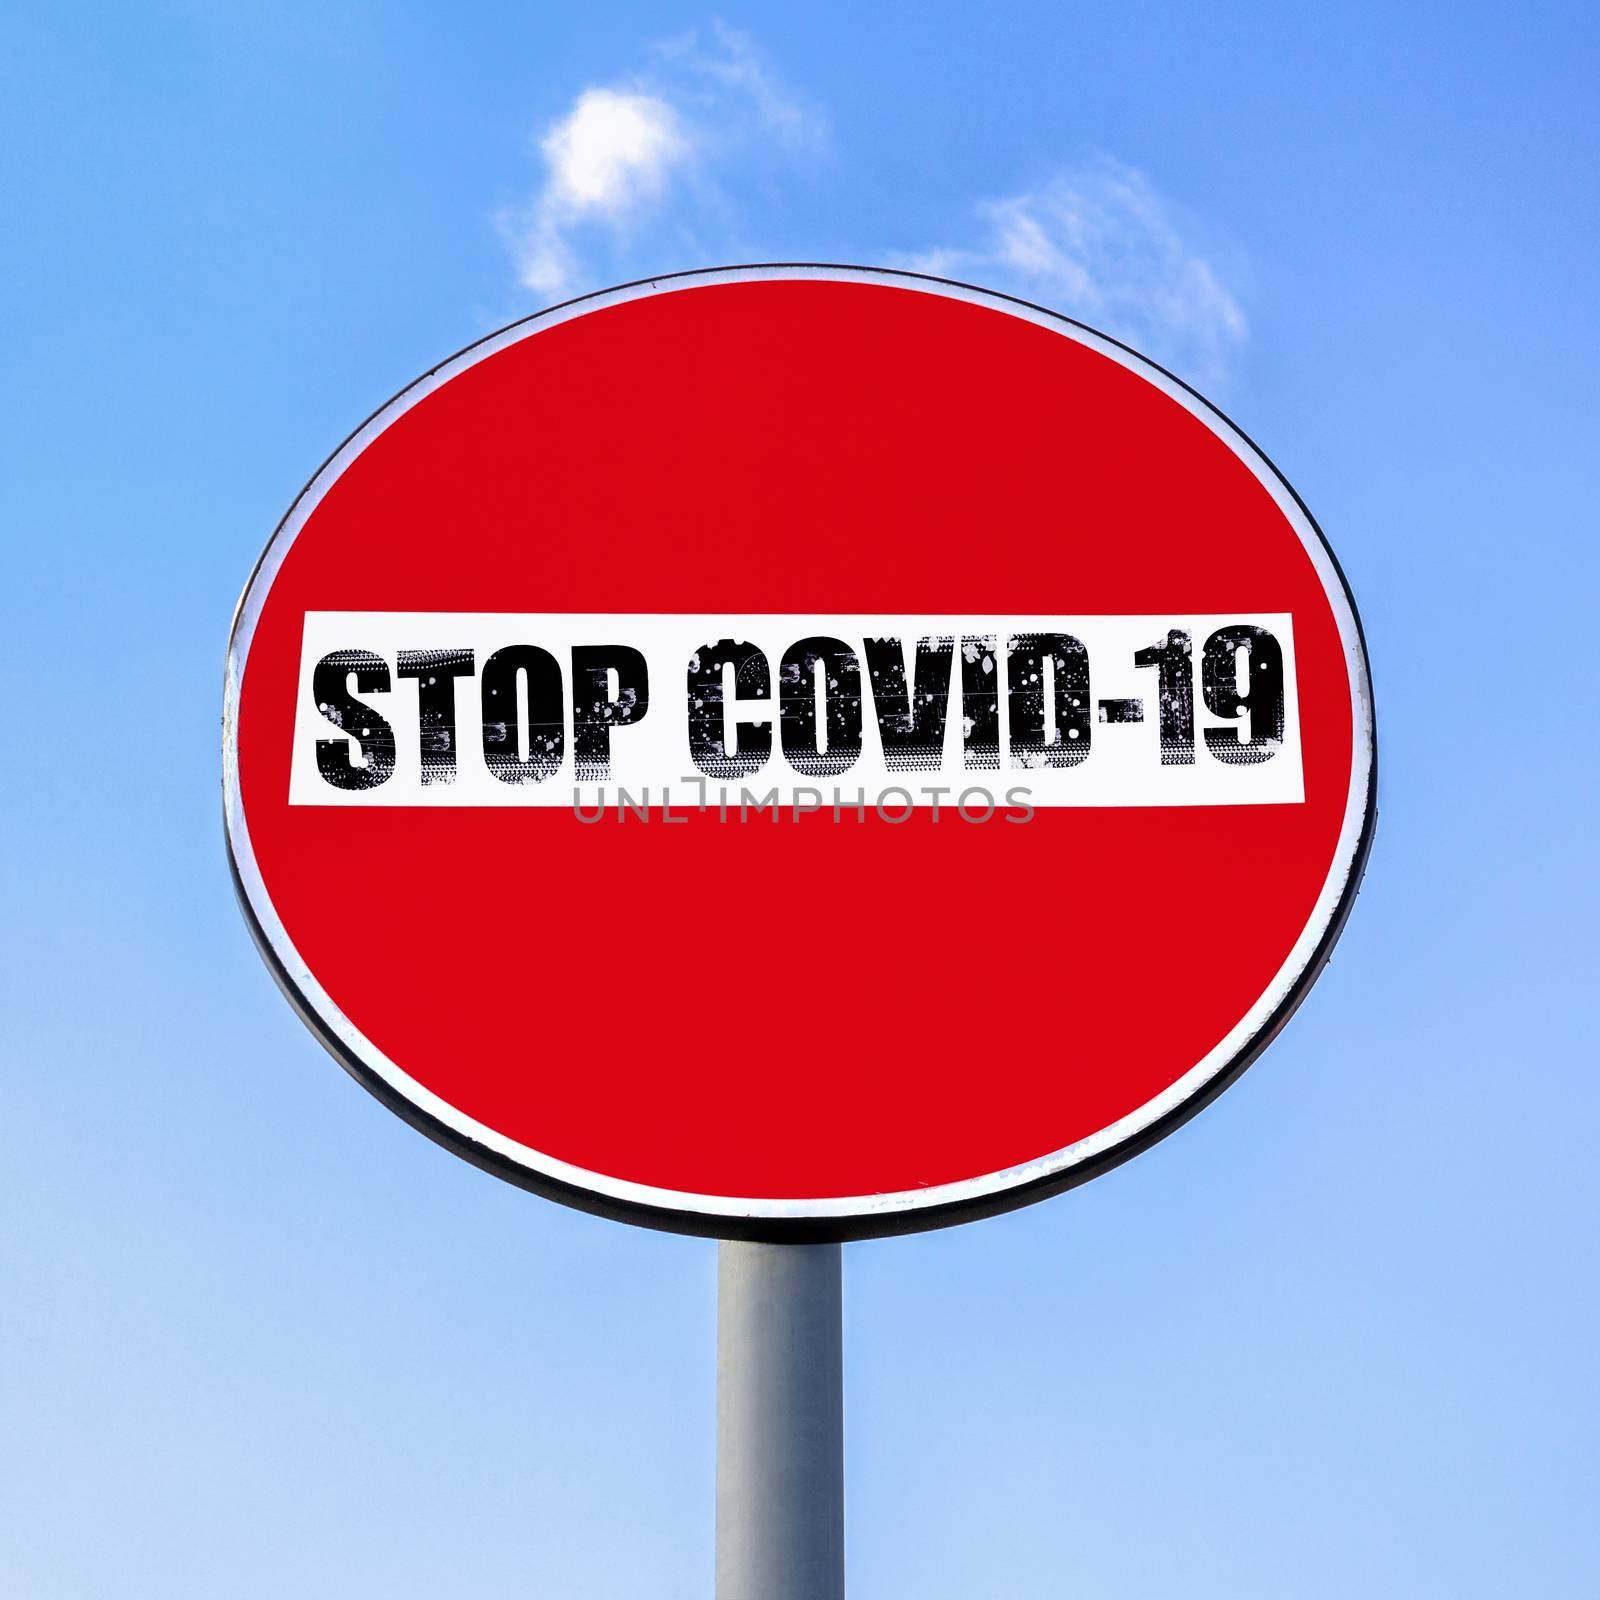 No access denied road sign with message STOP COVID-19 on sky background. COVID-19 alert banner. Lockdown. Concept of stop working activities due to coronavirus medical emergency.